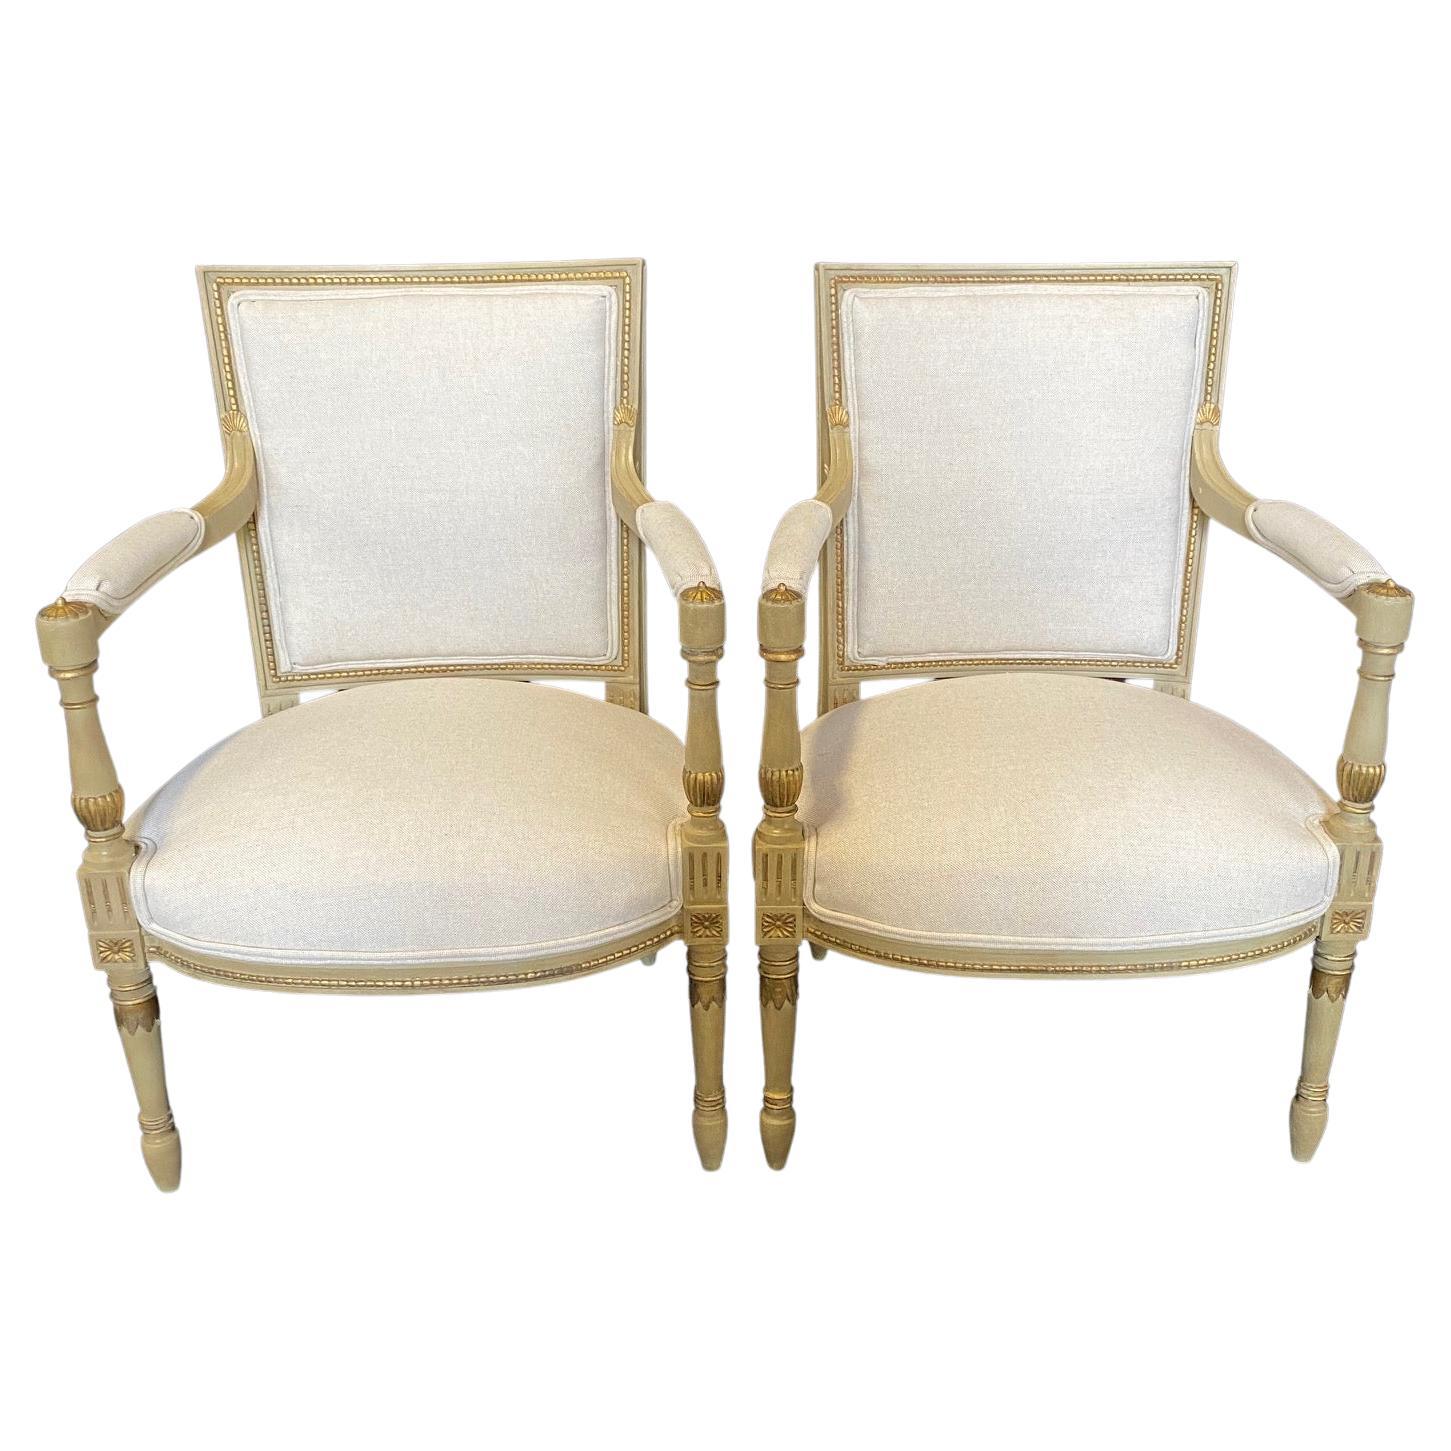 Stunning Pair of 19th Century French Neoclassical Armchairs For Sale